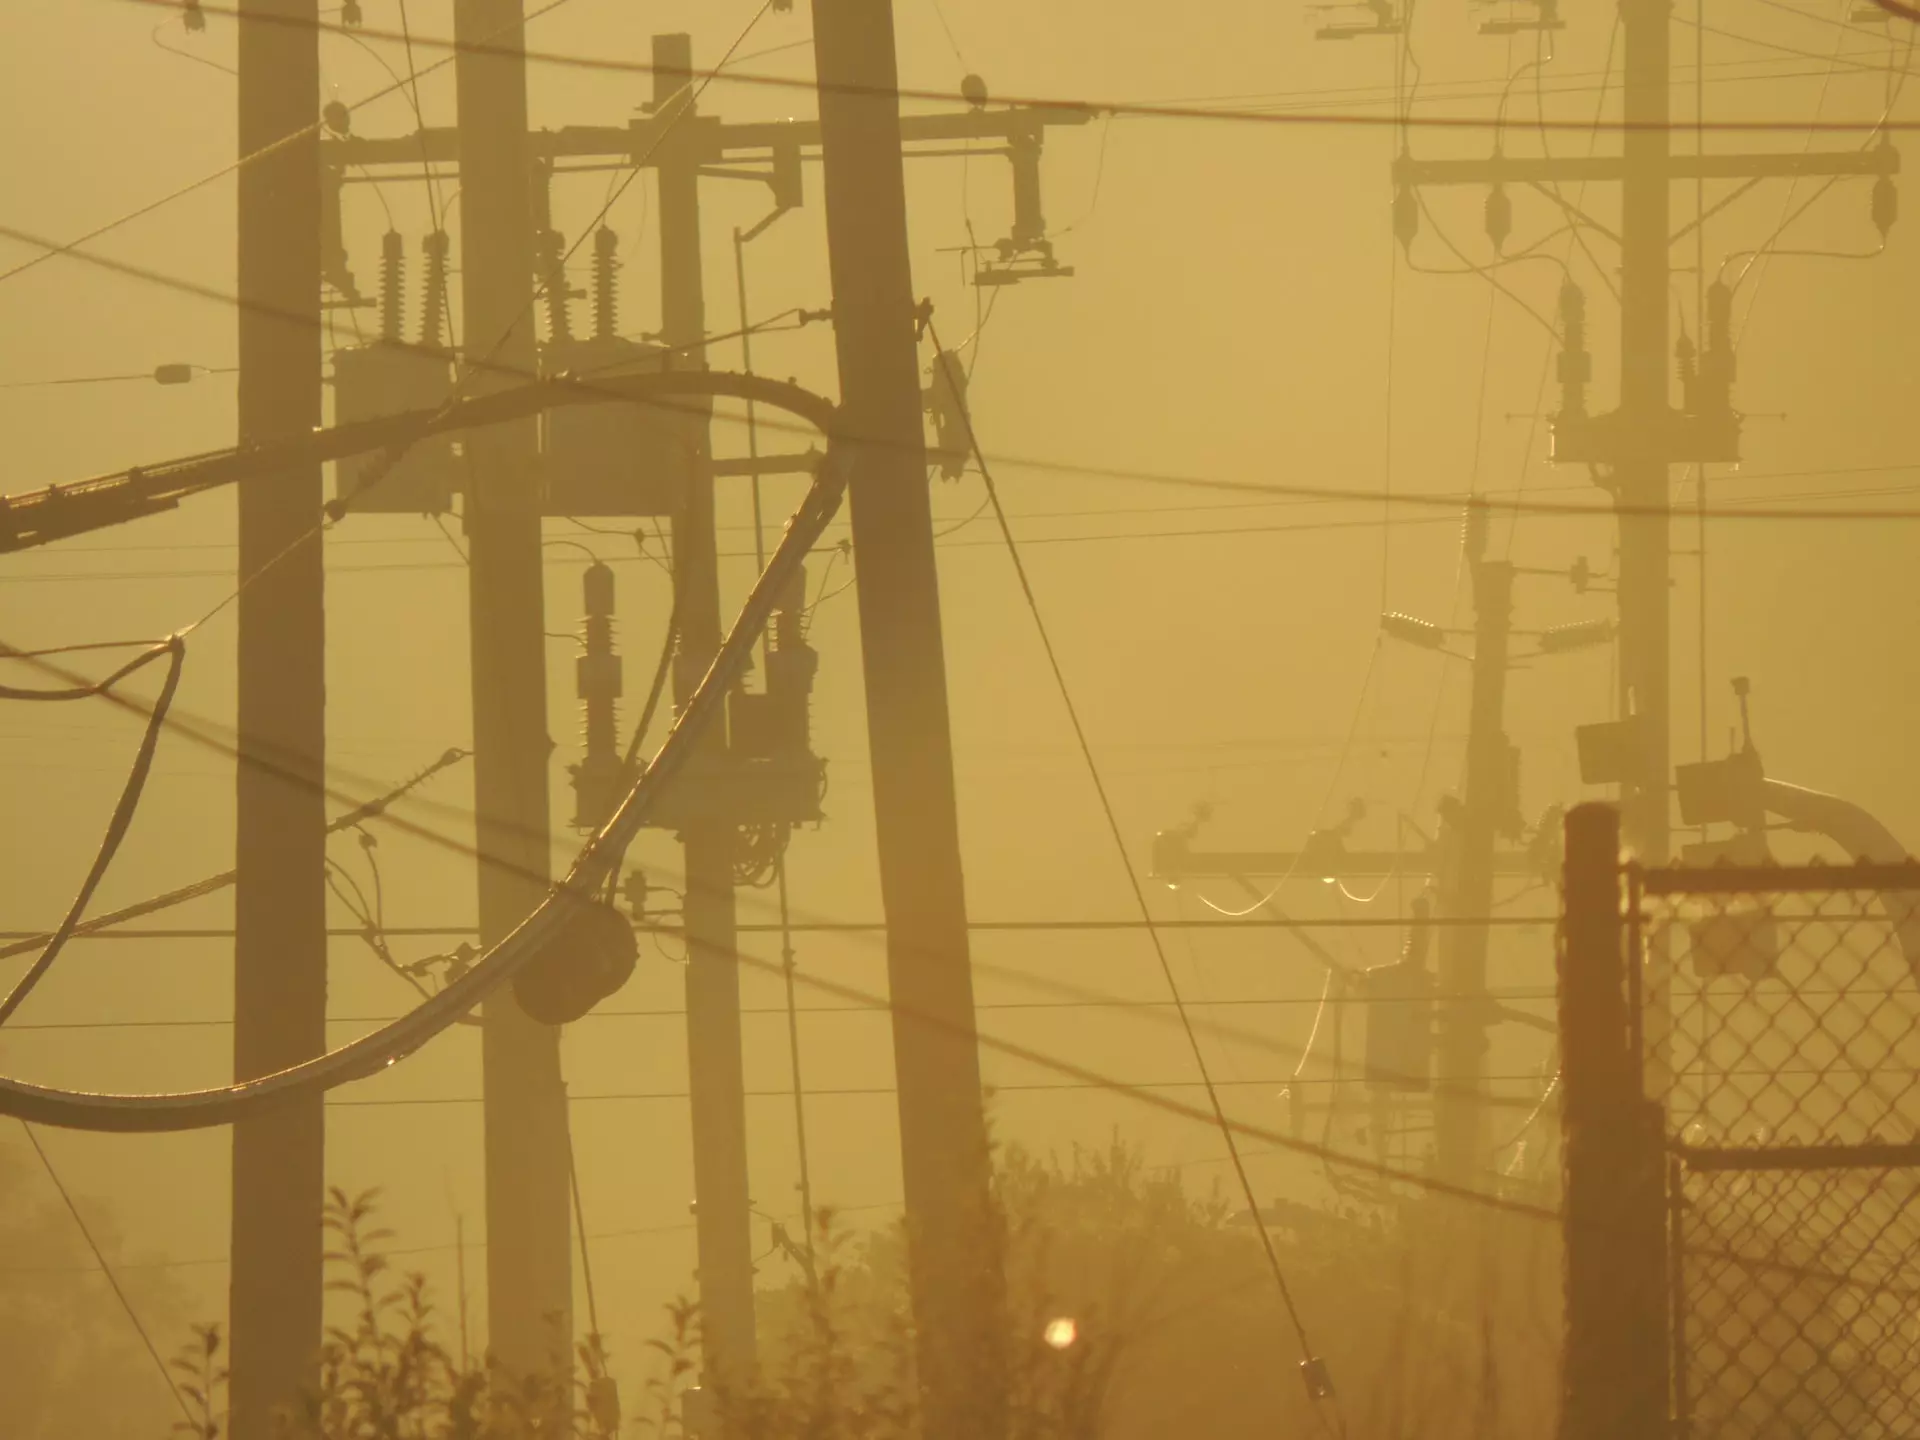 Electrical infrastructure in the smog